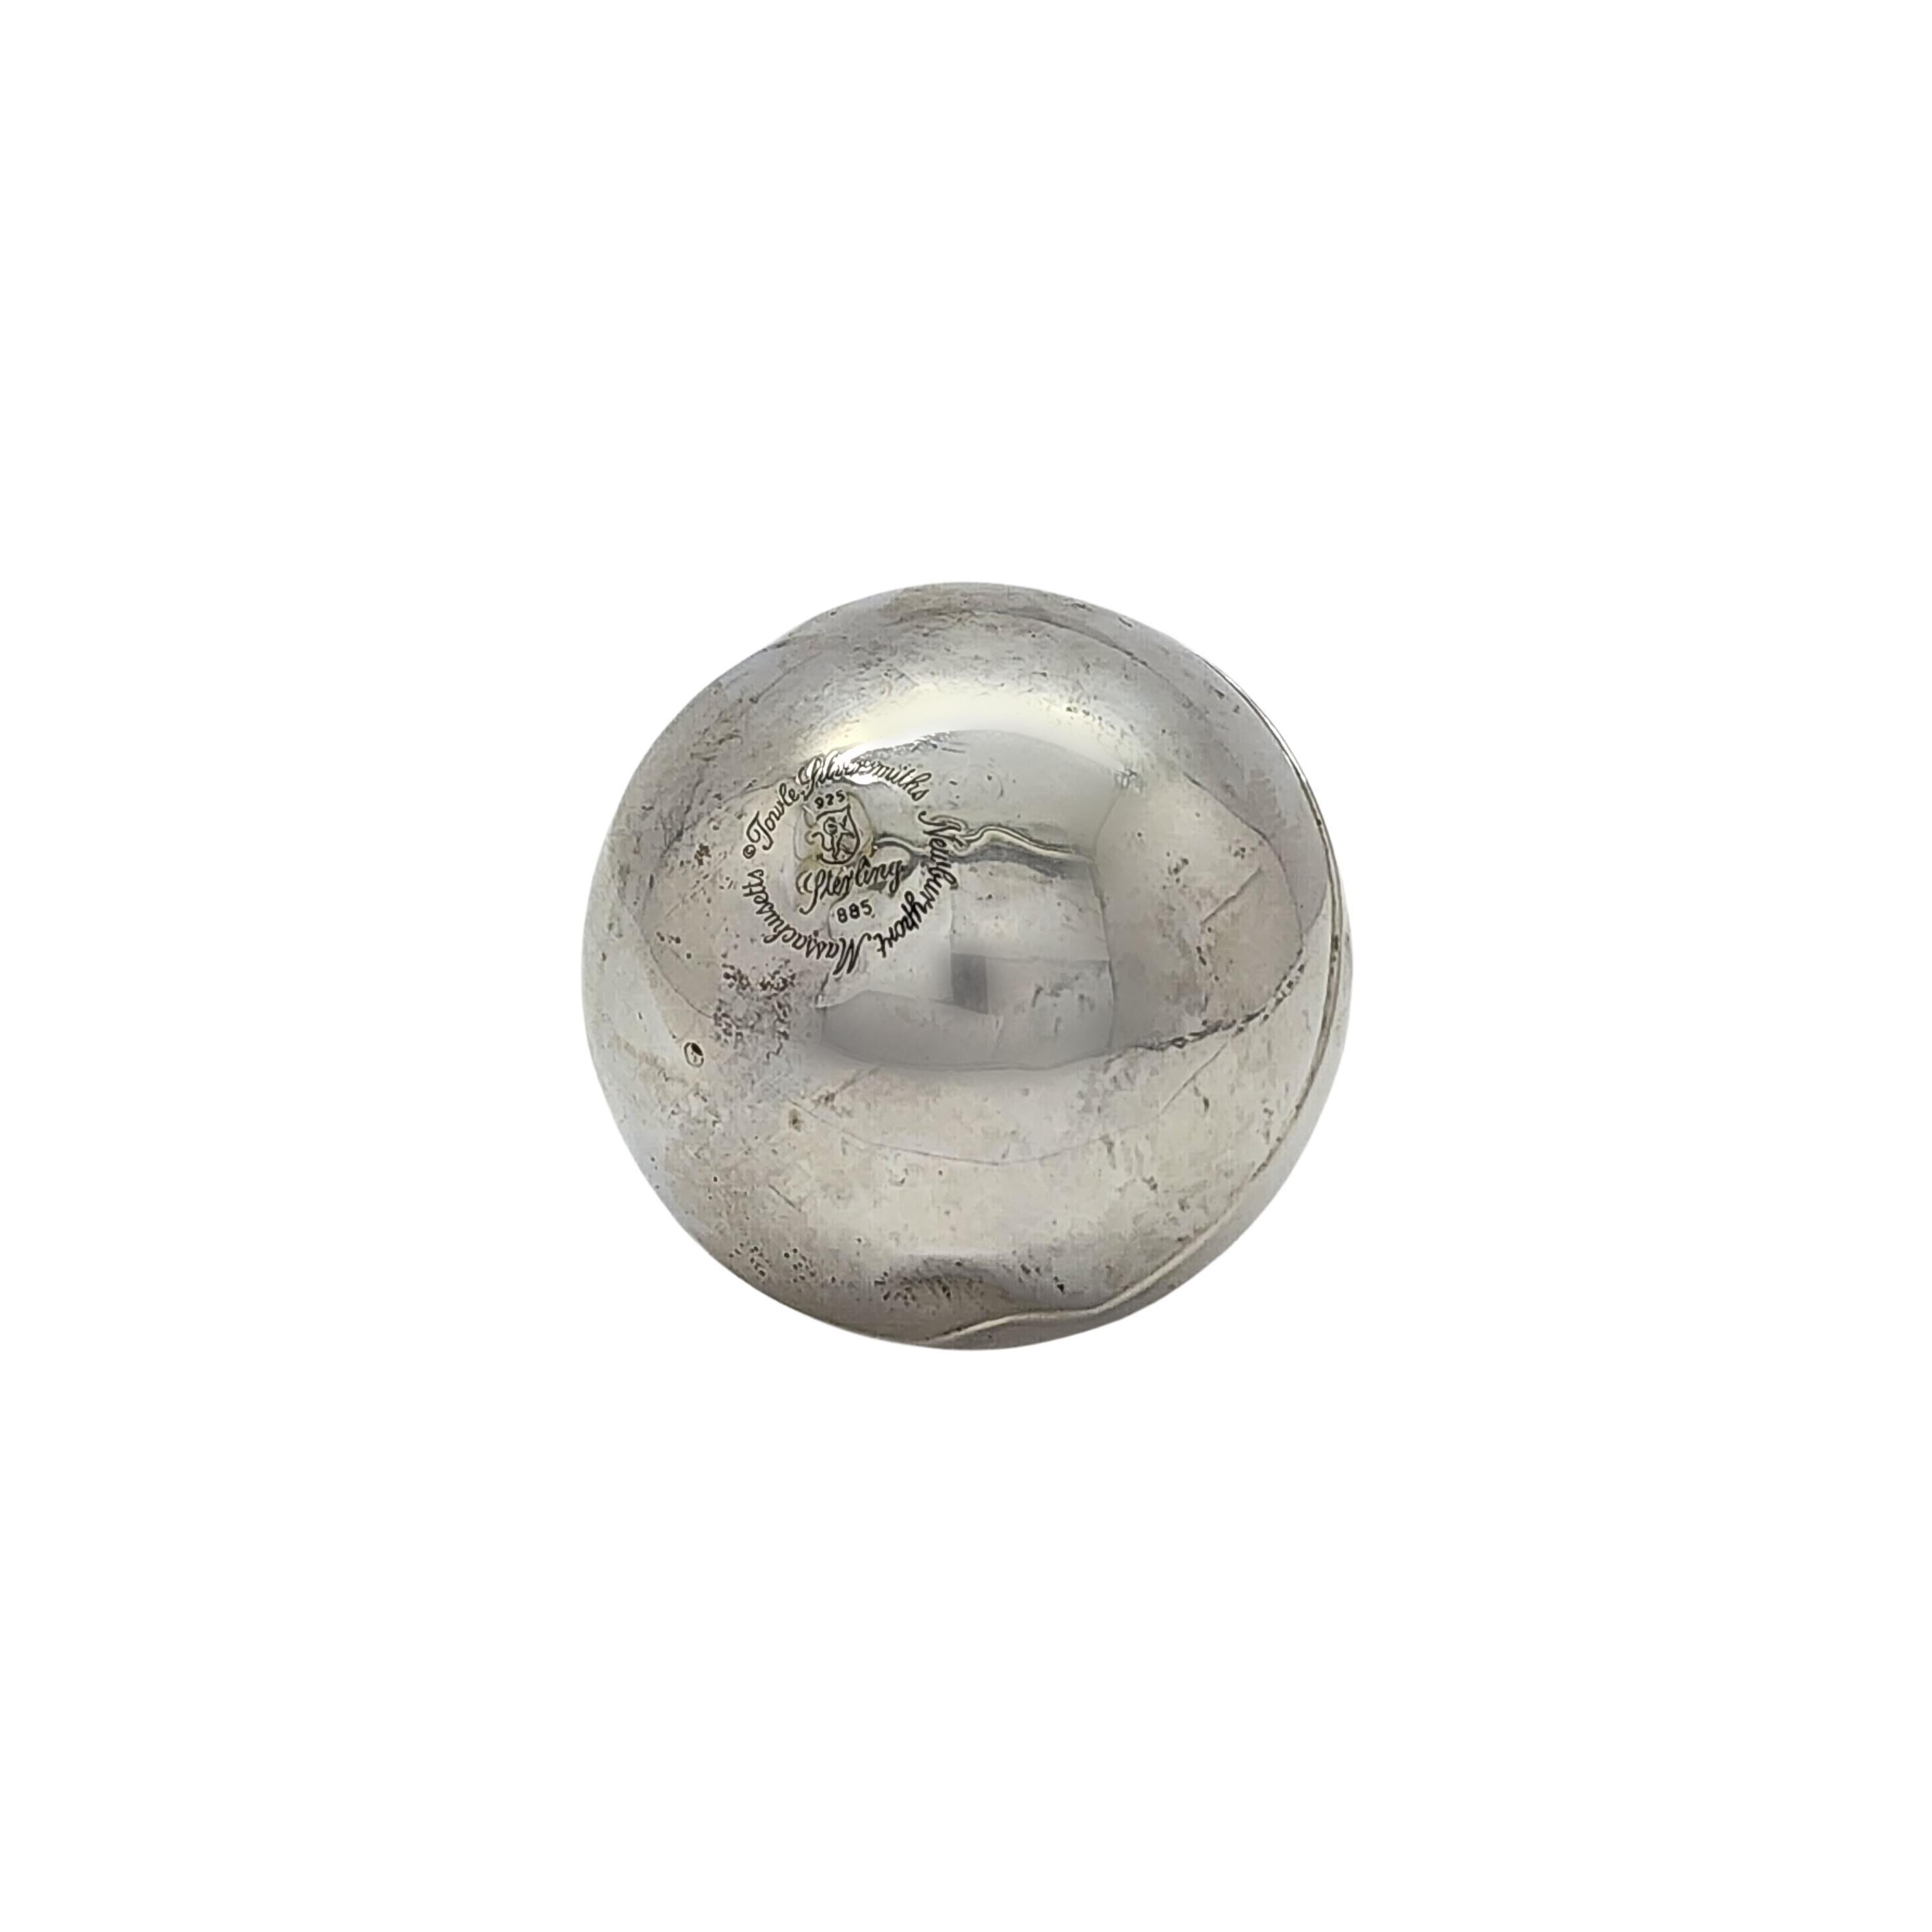 Towle Sterling Silver Ball Christmas Tree Ornament #15739 1